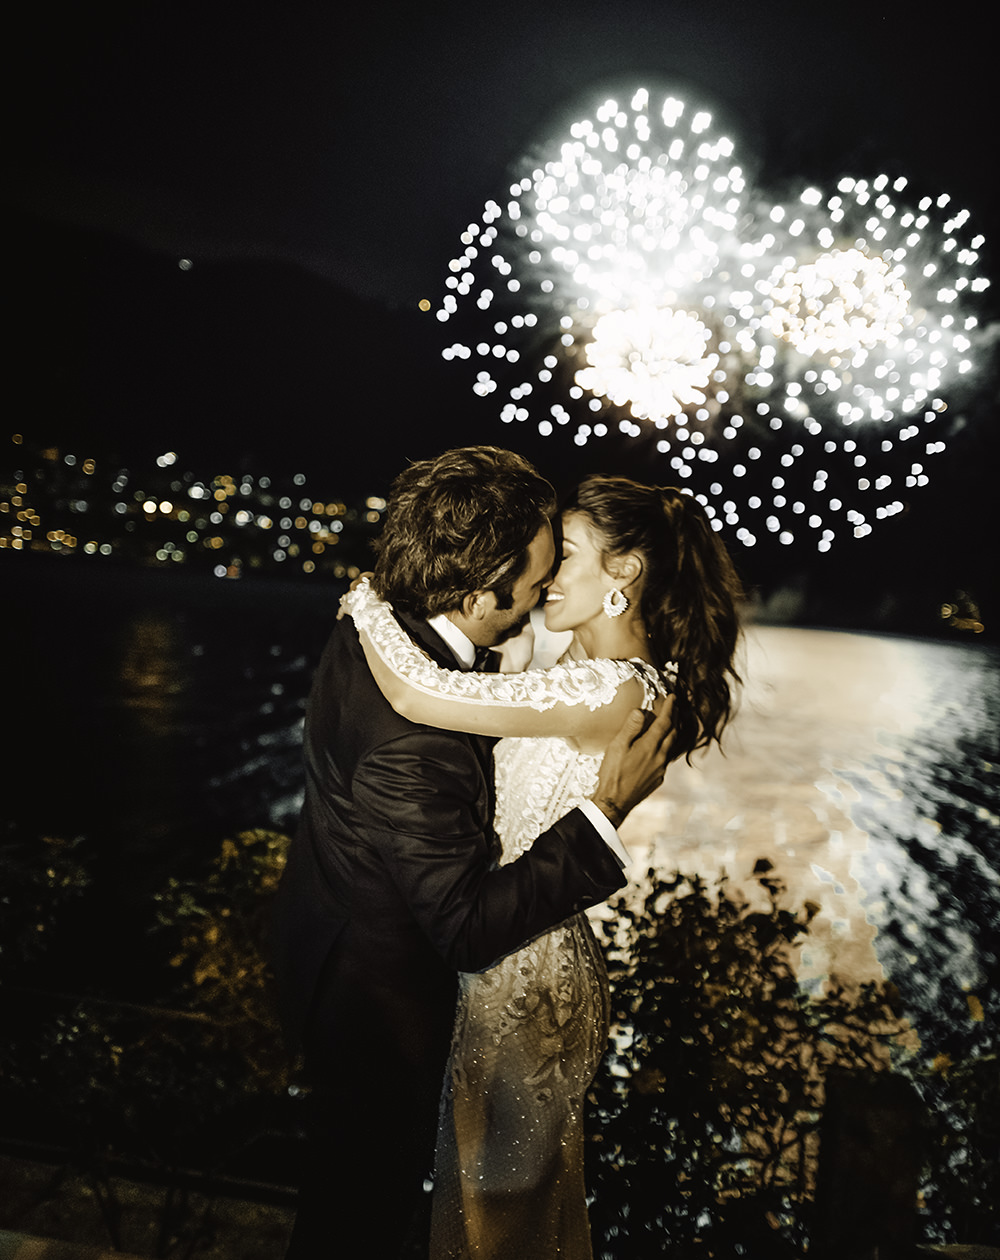 Lighting and Fireworks for a fabulous Wedding Celebration